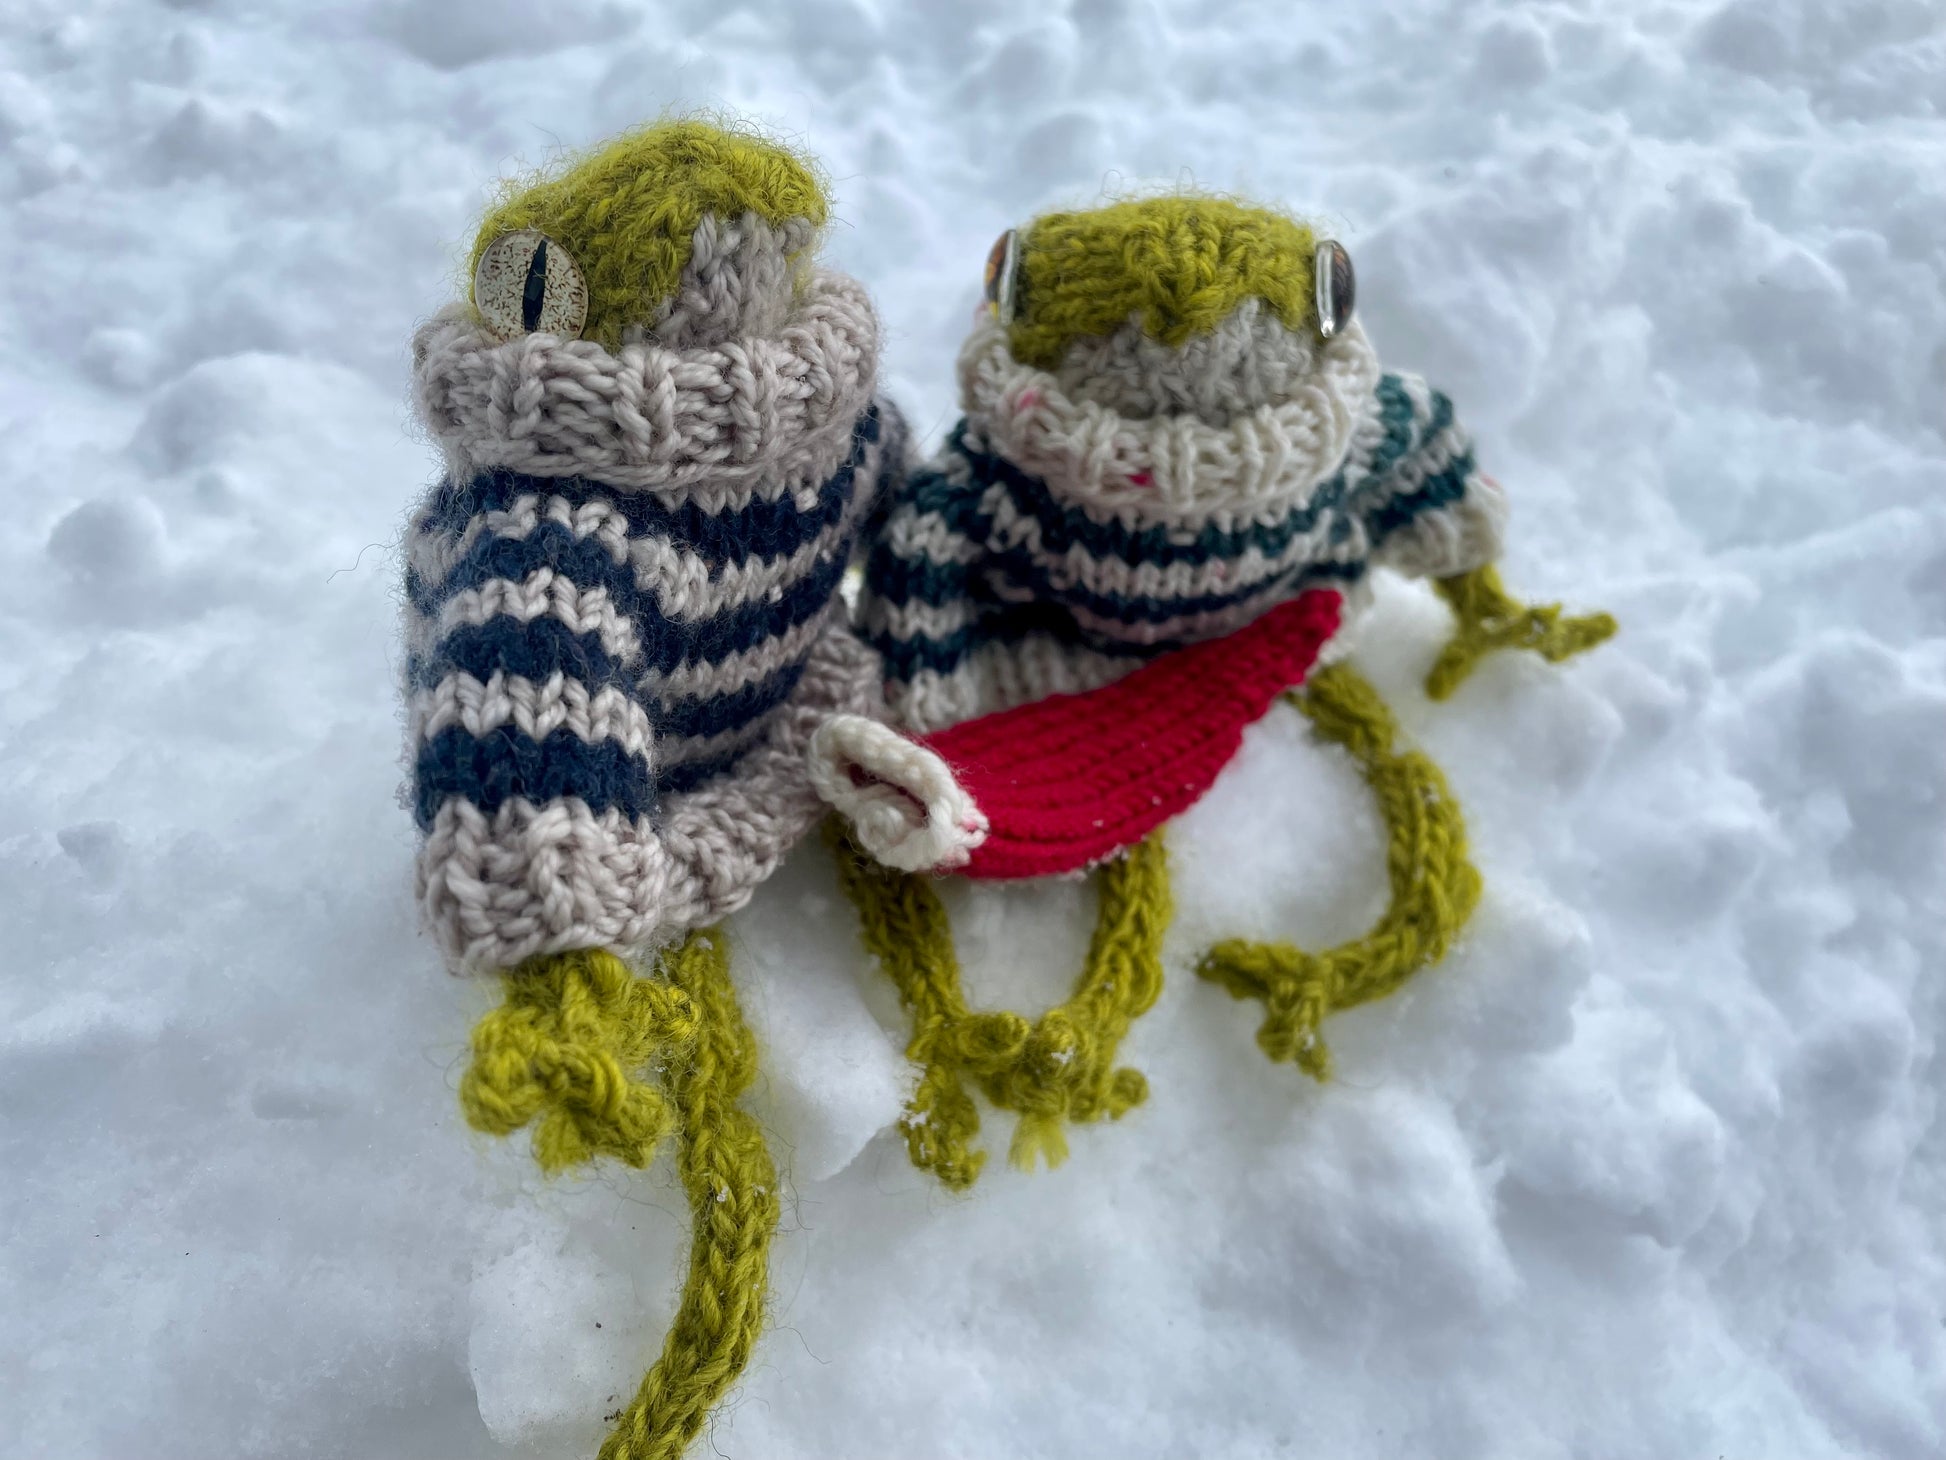 knitknitfrog: Home made things